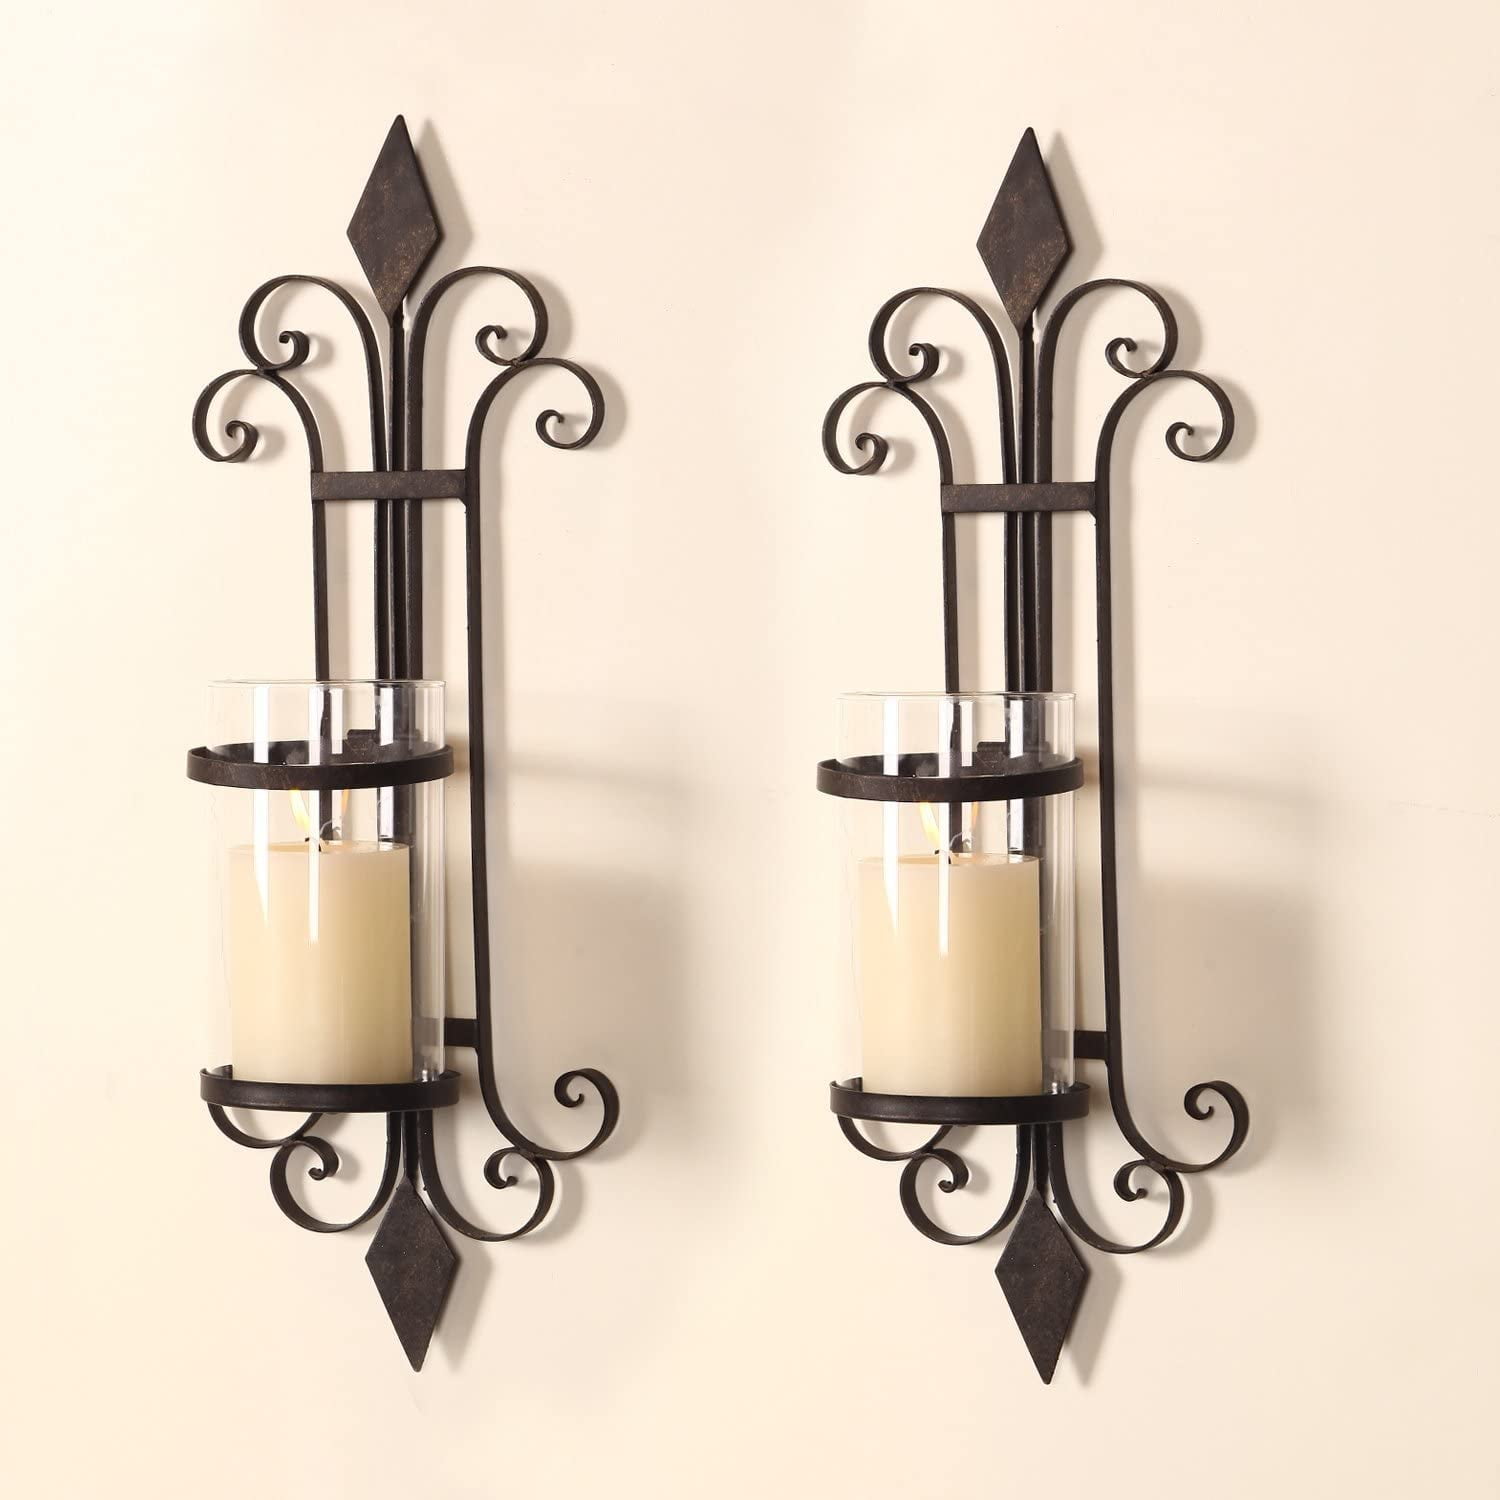 NEW TUSCAN FRENCH ANTIQUE SCROLL 25"H IRON WOOD Candle Holder Wall Sconce SET/2 